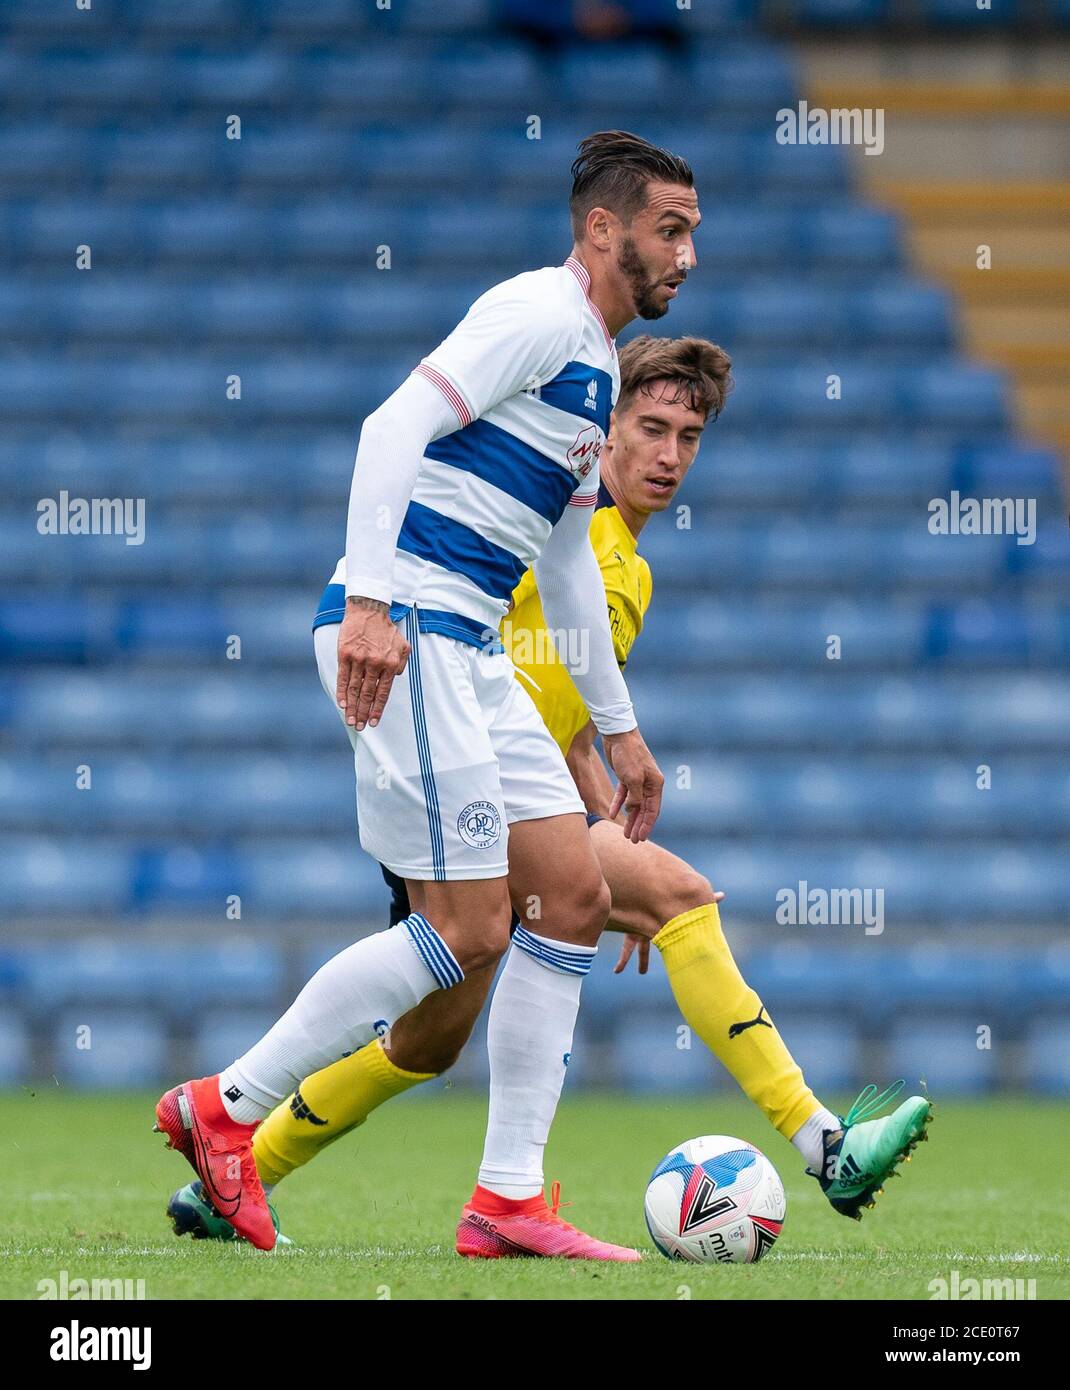 Oxford, UK. 29th Aug, 2020. Geoff Cameron of QPR during the 2020/21 behind closed doors Pre Season Friendly match between Oxford United and Queens Park Rangers at the Kassam Stadium, Oxford, England on 29 August 2020. Photo by Andy Rowland. Credit: PRiME Media Images/Alamy Live News Stock Photo